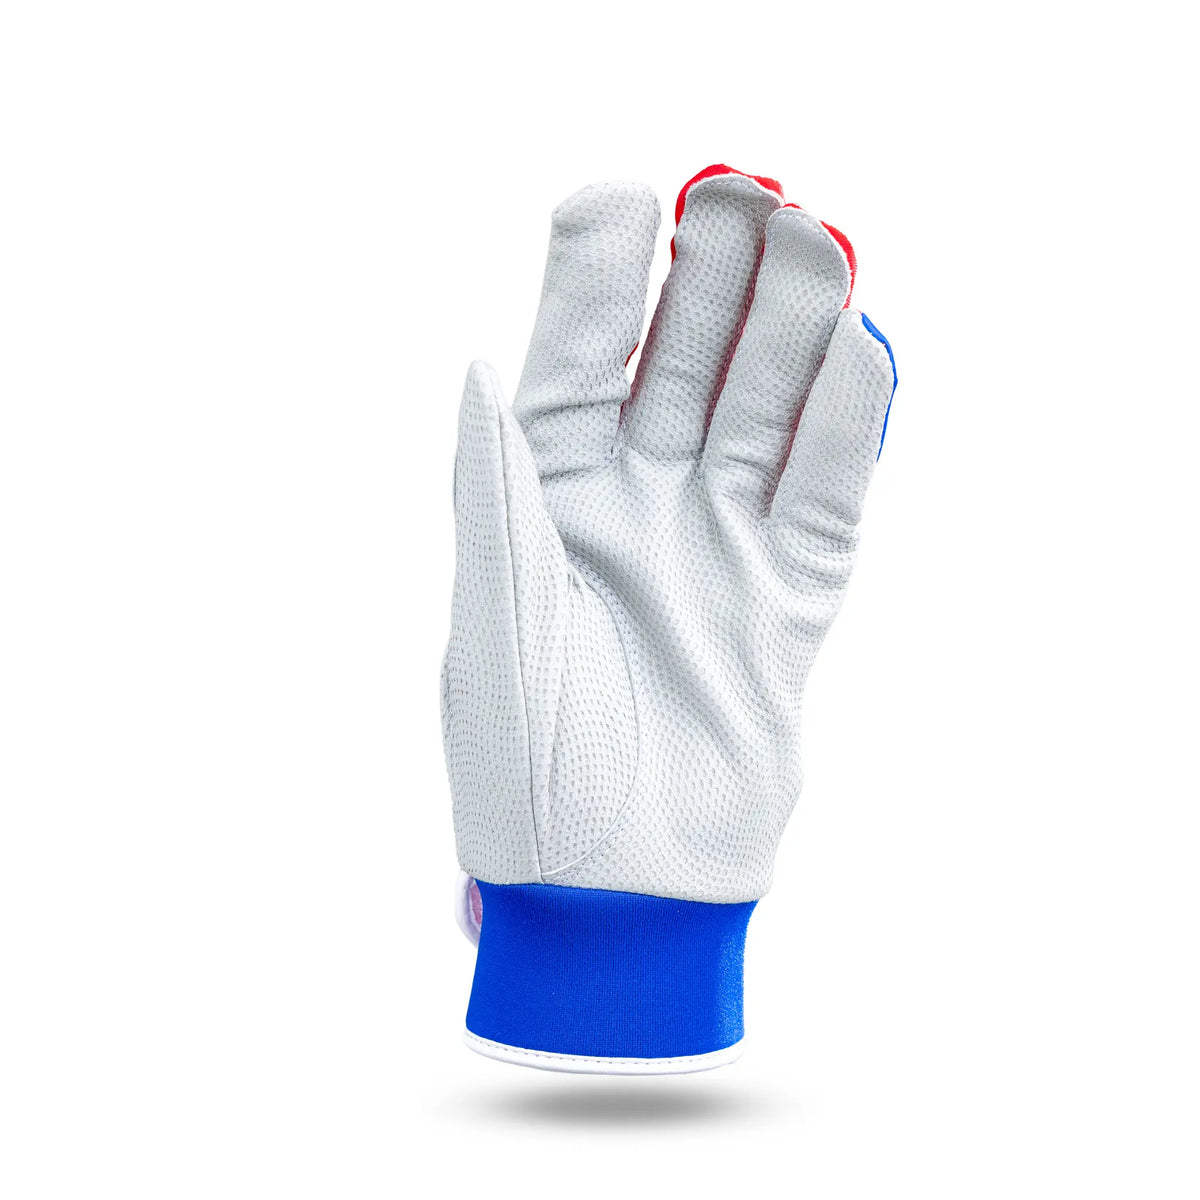 Palm view of Tater Baseball&#39;s high-performance batting gloves, featuring durable white mesh for breathability, with red stitched accents and a blue neoprene wrist cuff for secure fit and comfort, against a clean white background.